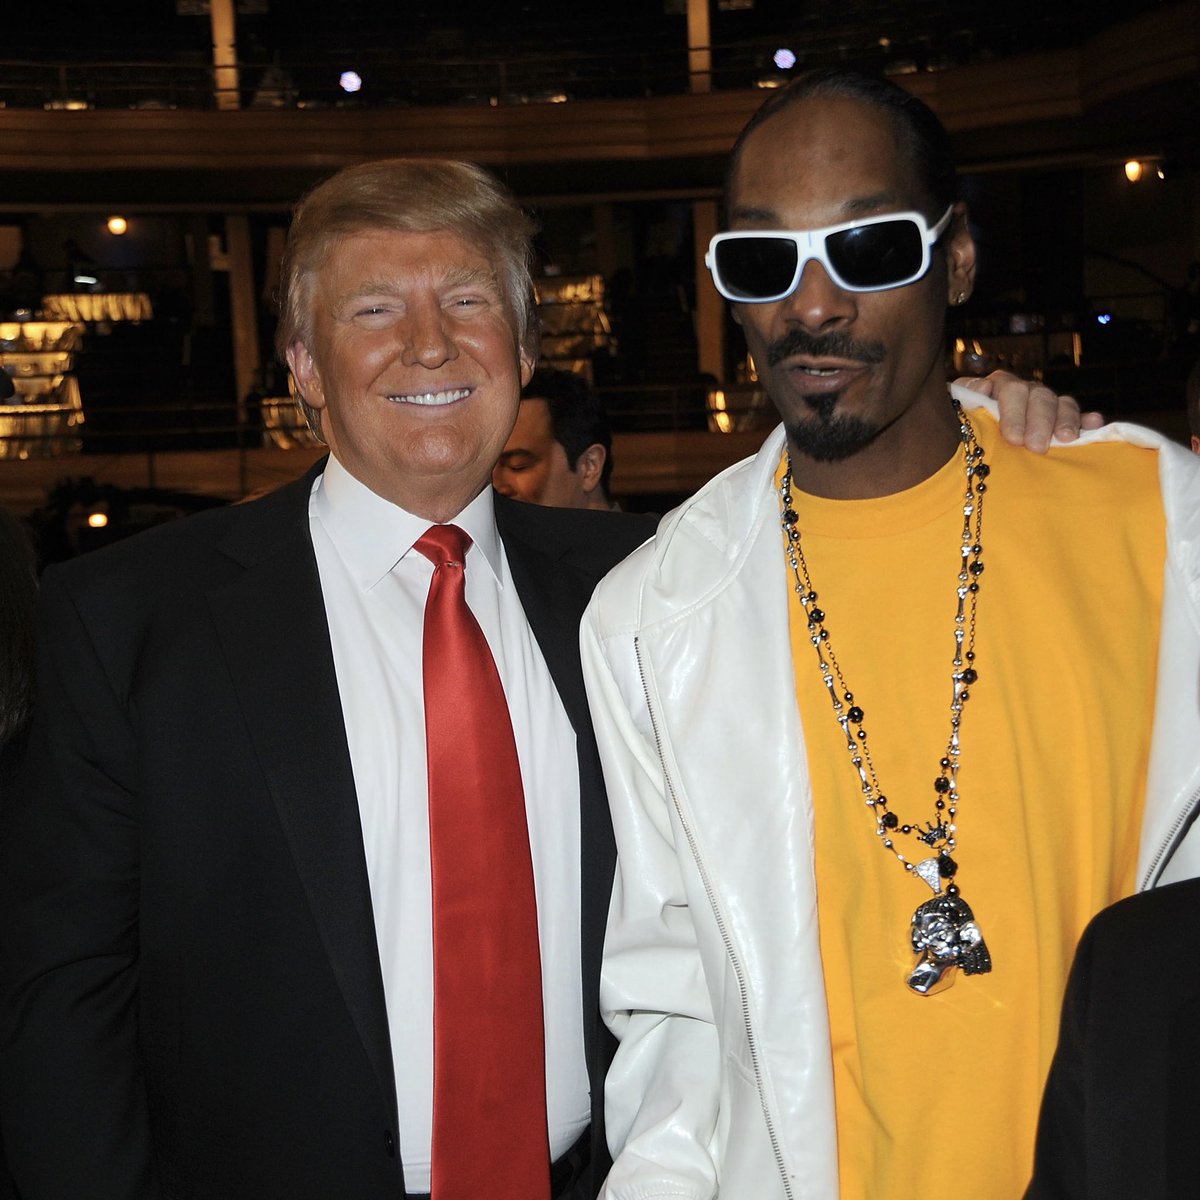 JUST IN: Snoop Dogg says he now has “nothing but love and respect” for Donald Trump. Wow. The comments came during an interview with The Times. “Donald Trump? He ain’t done nothing wrong to me. He has done only great things for me.” Snoop specifically pointed to how Trump…